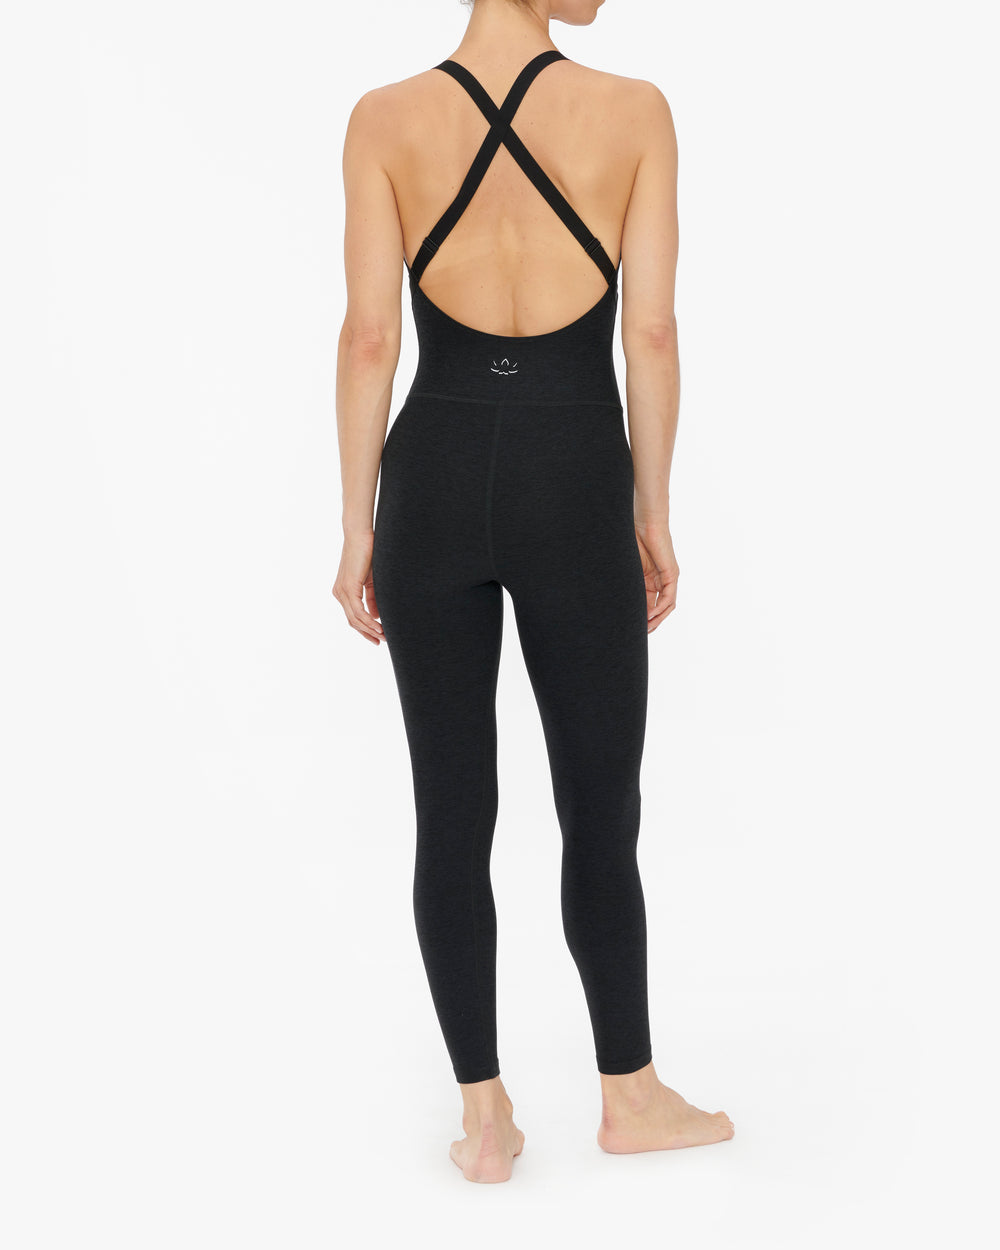 BEYOND YOGA PLAY THE ANGLES JUMPSUIT